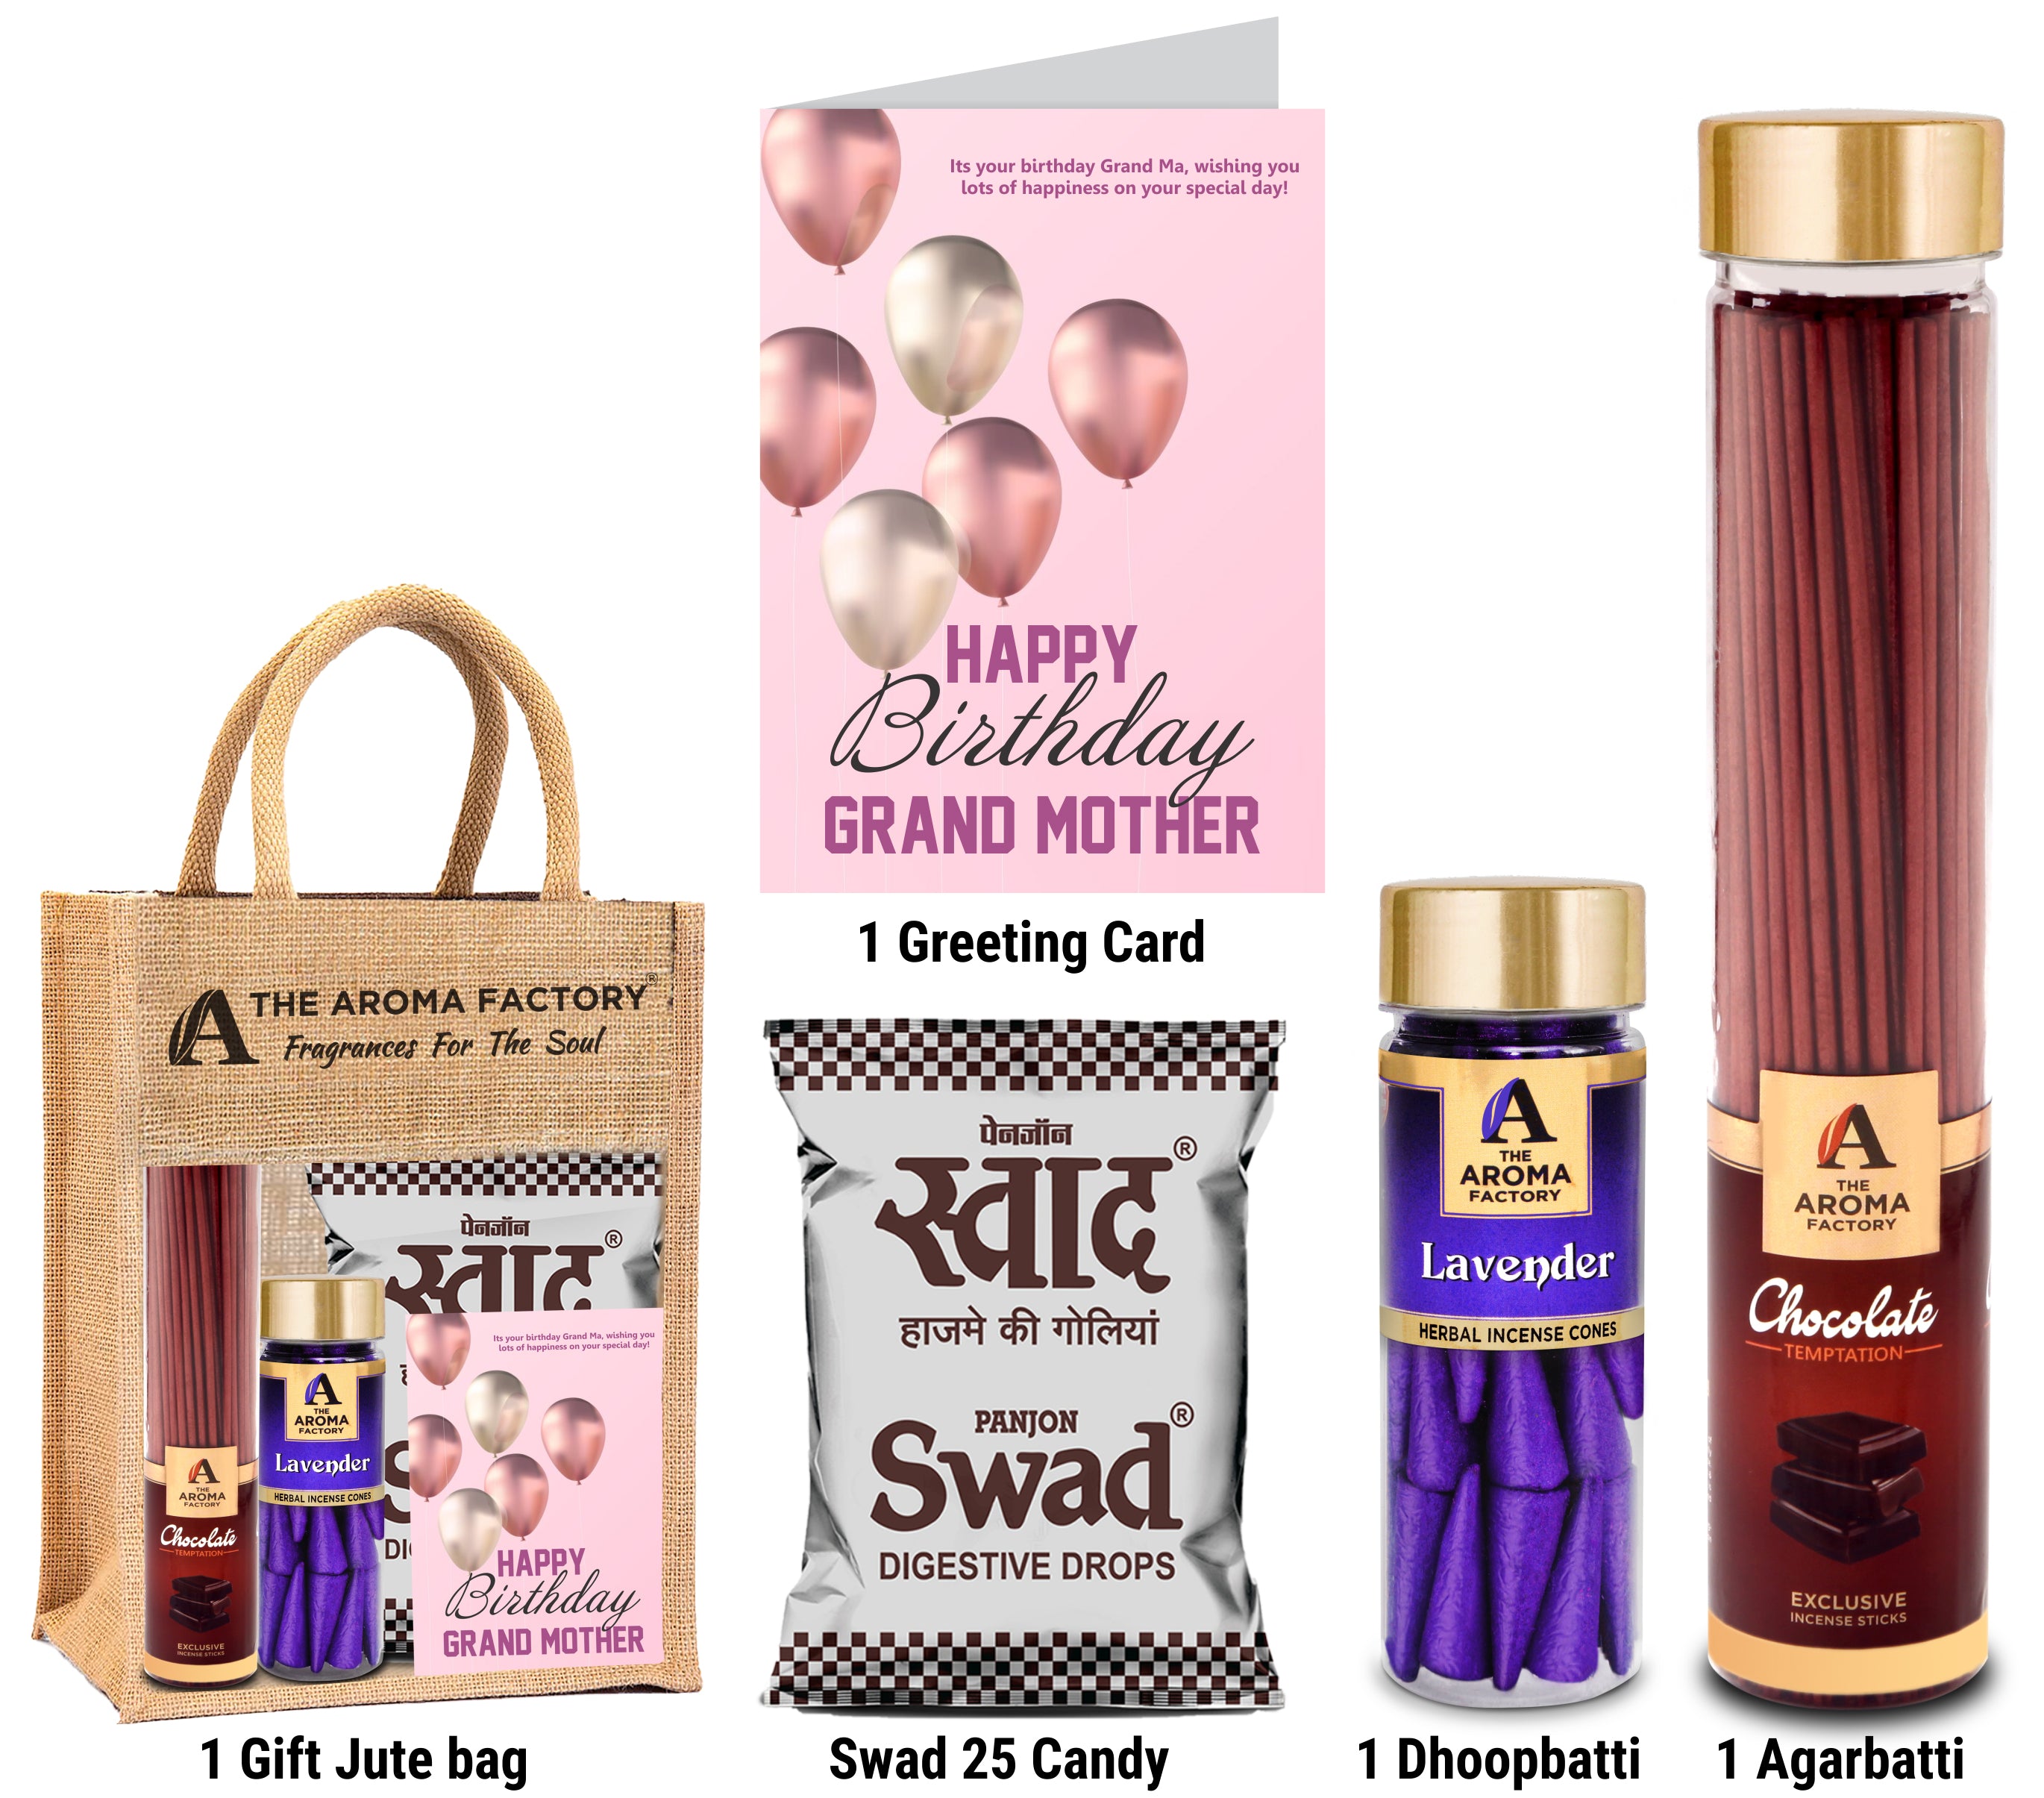 The Aroma Factory Happy Birthday Dadi Grand Mom Gift with Card (25 Swad Candy, Chocolate Agarbatti Bottle, Lavender Cone) in Jute Bag